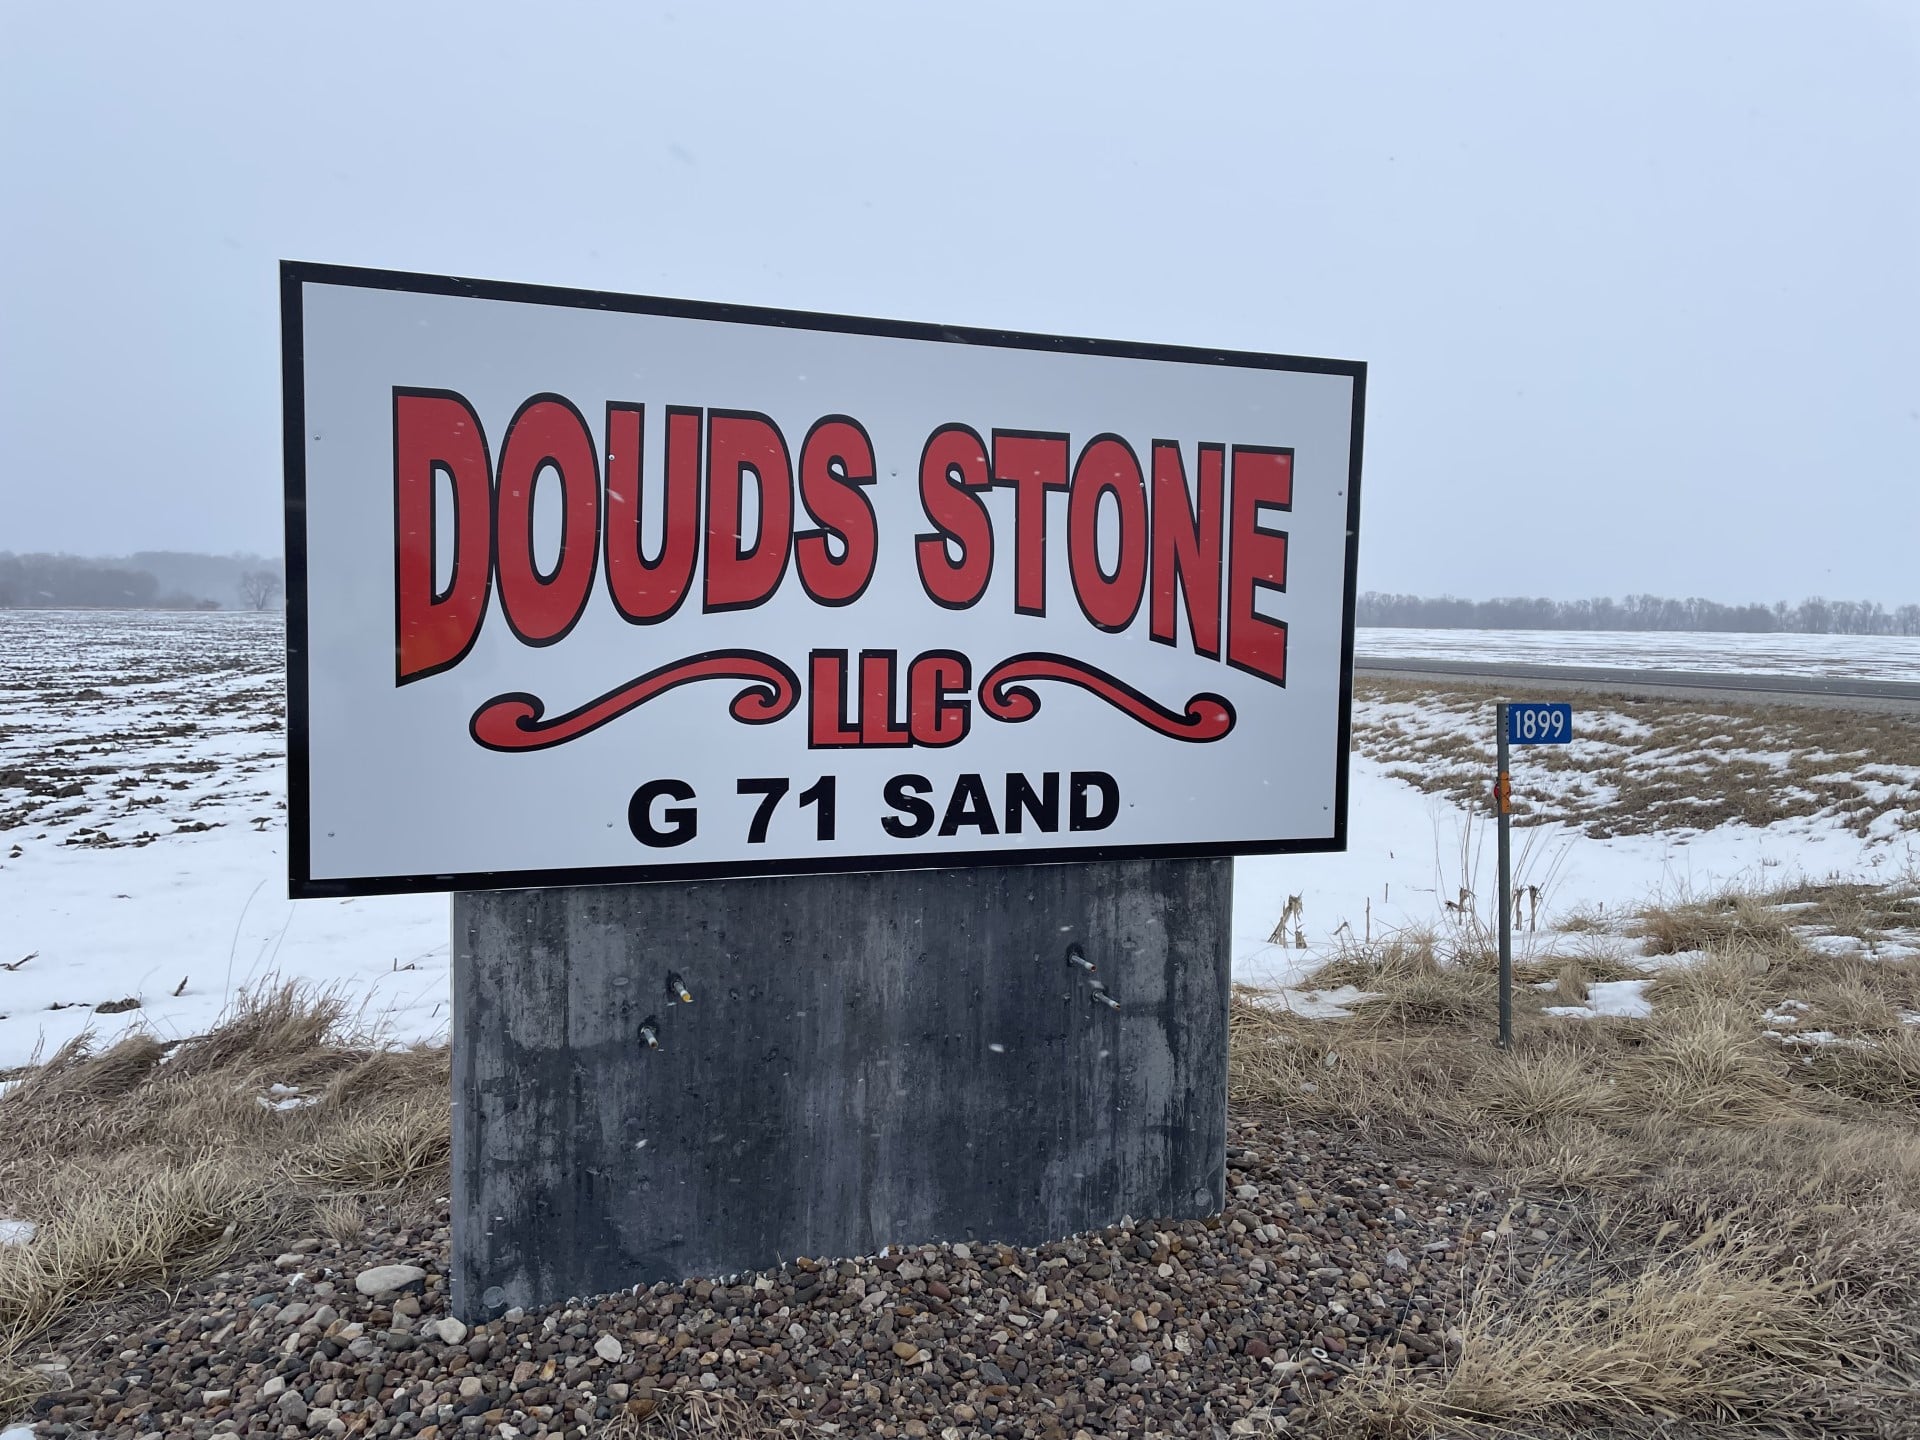 Douds Stone G71 Sand